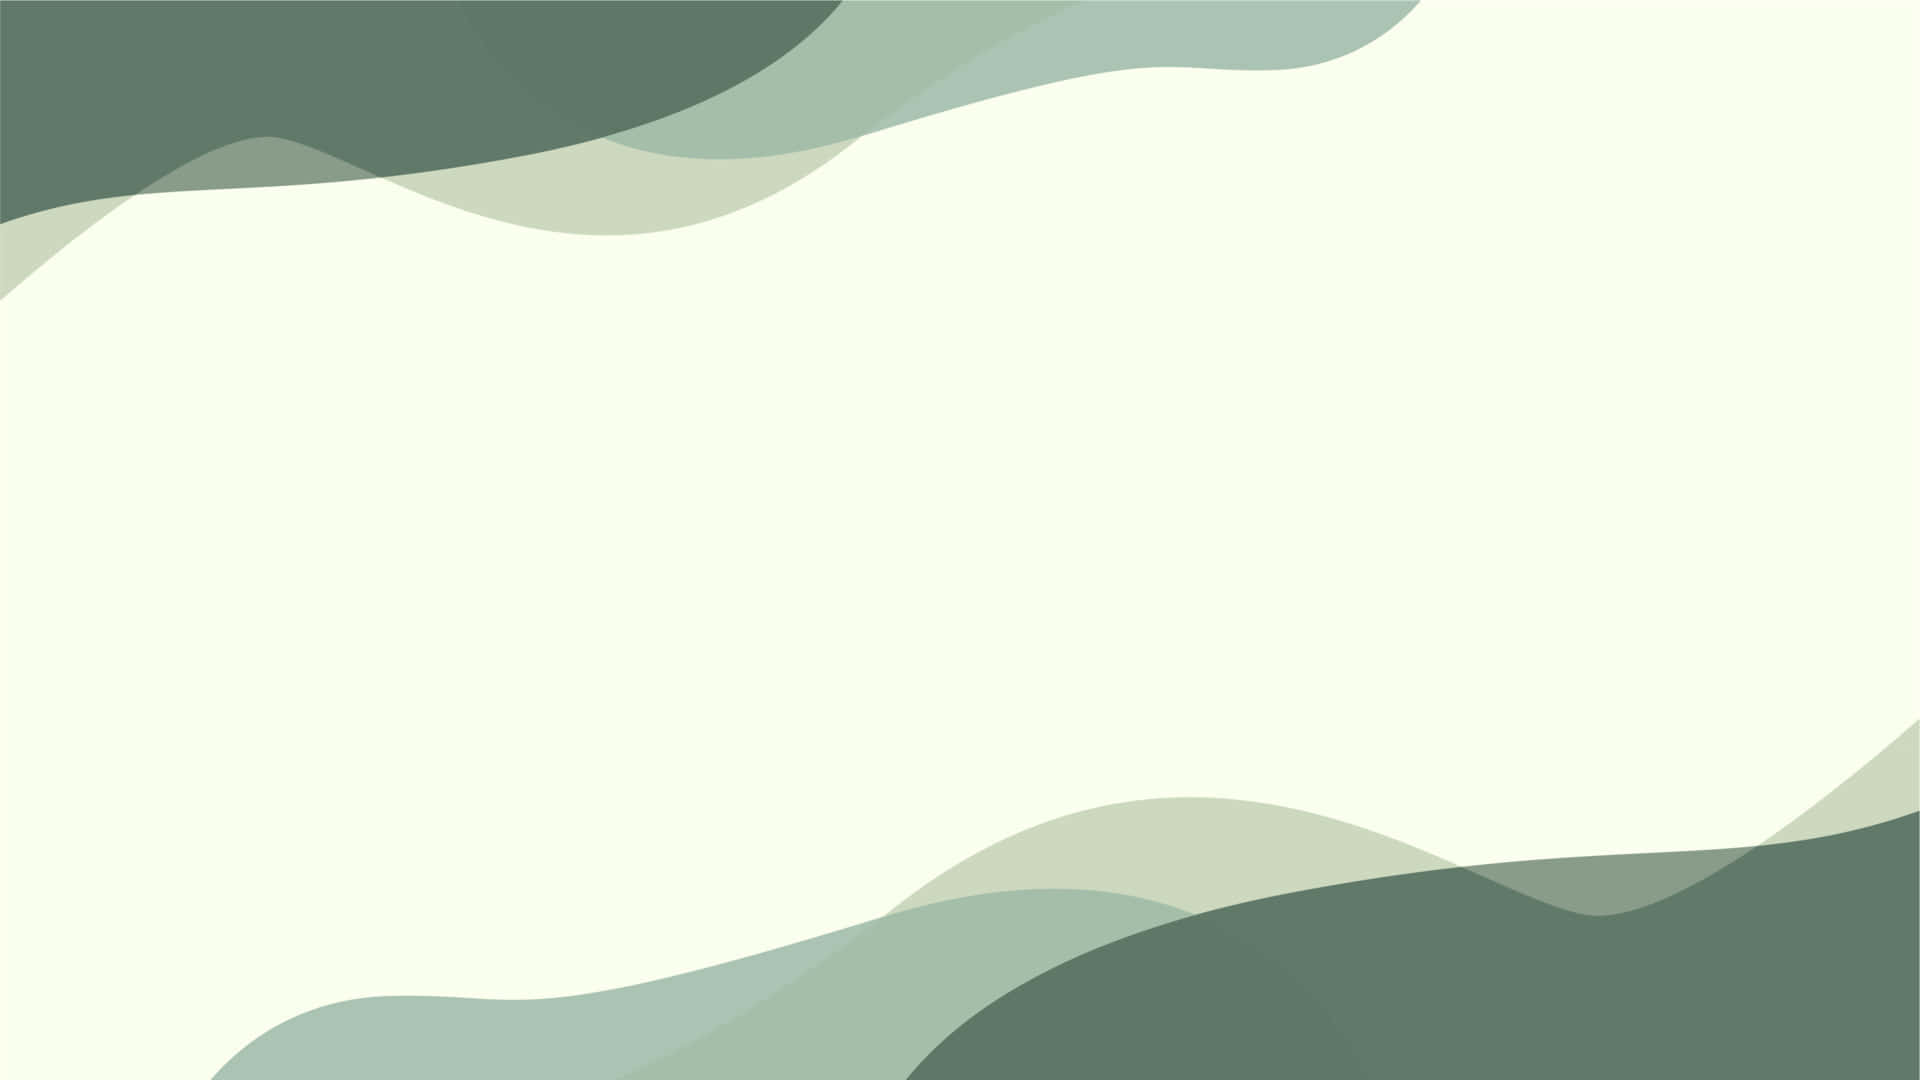 Download A Green And White Abstract Background With Waves | Wallpapers.com